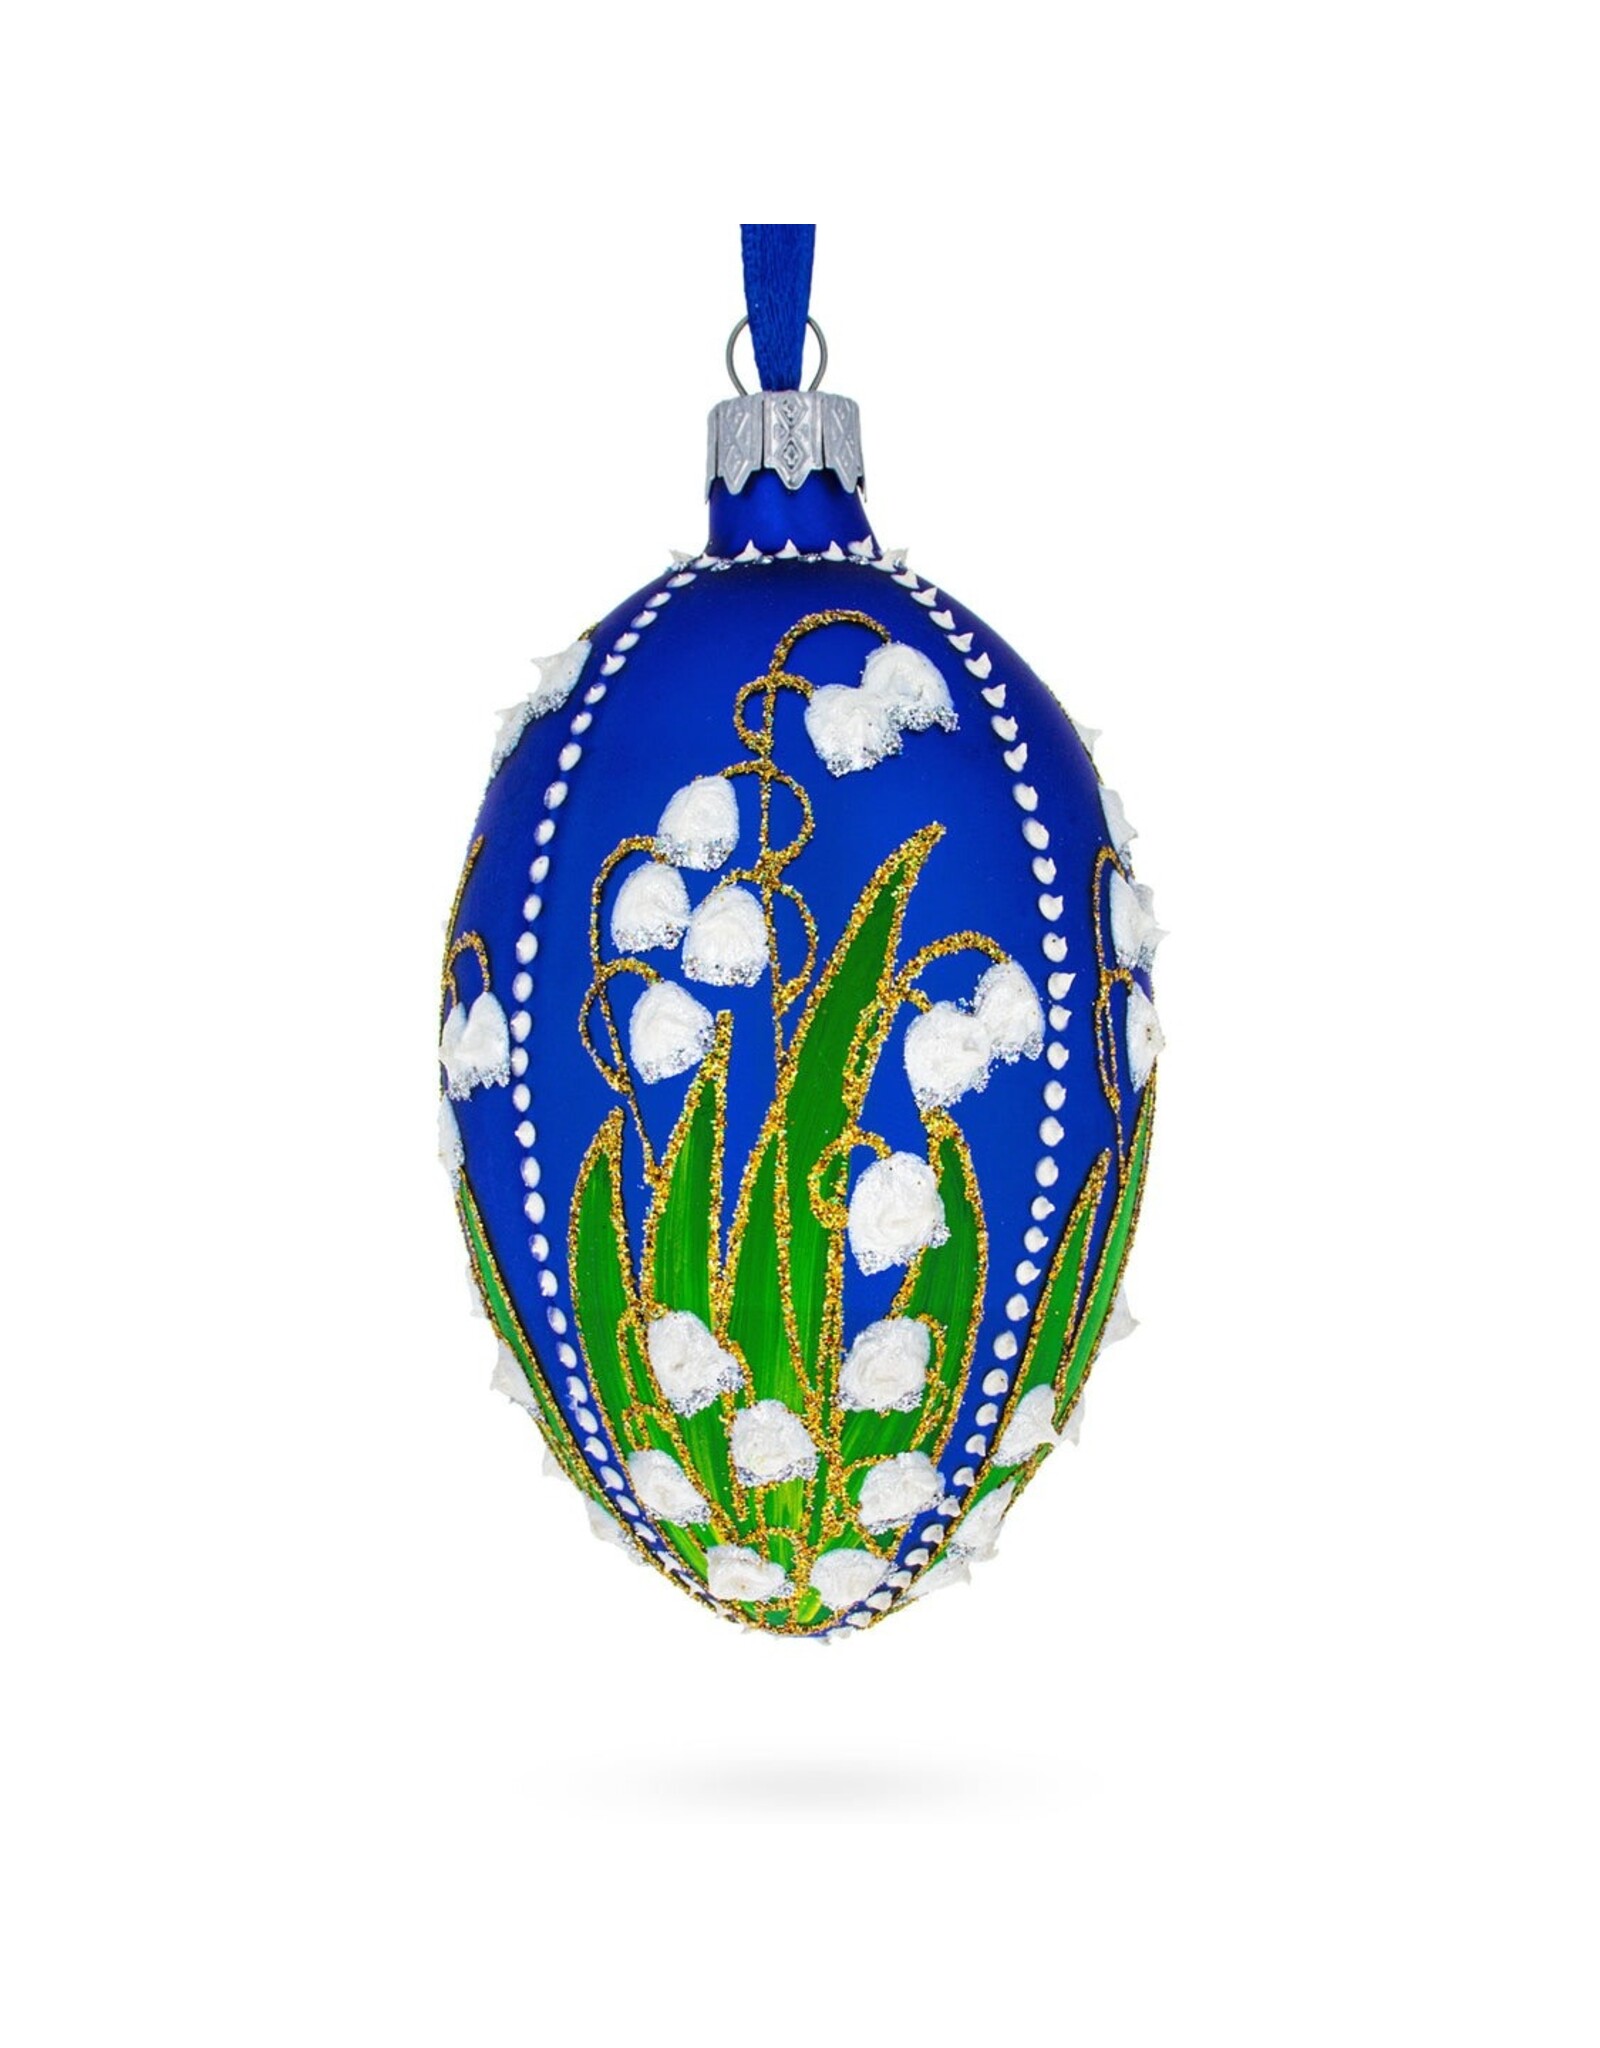 Lily of the Valley on Blue Glass Egg Ornament